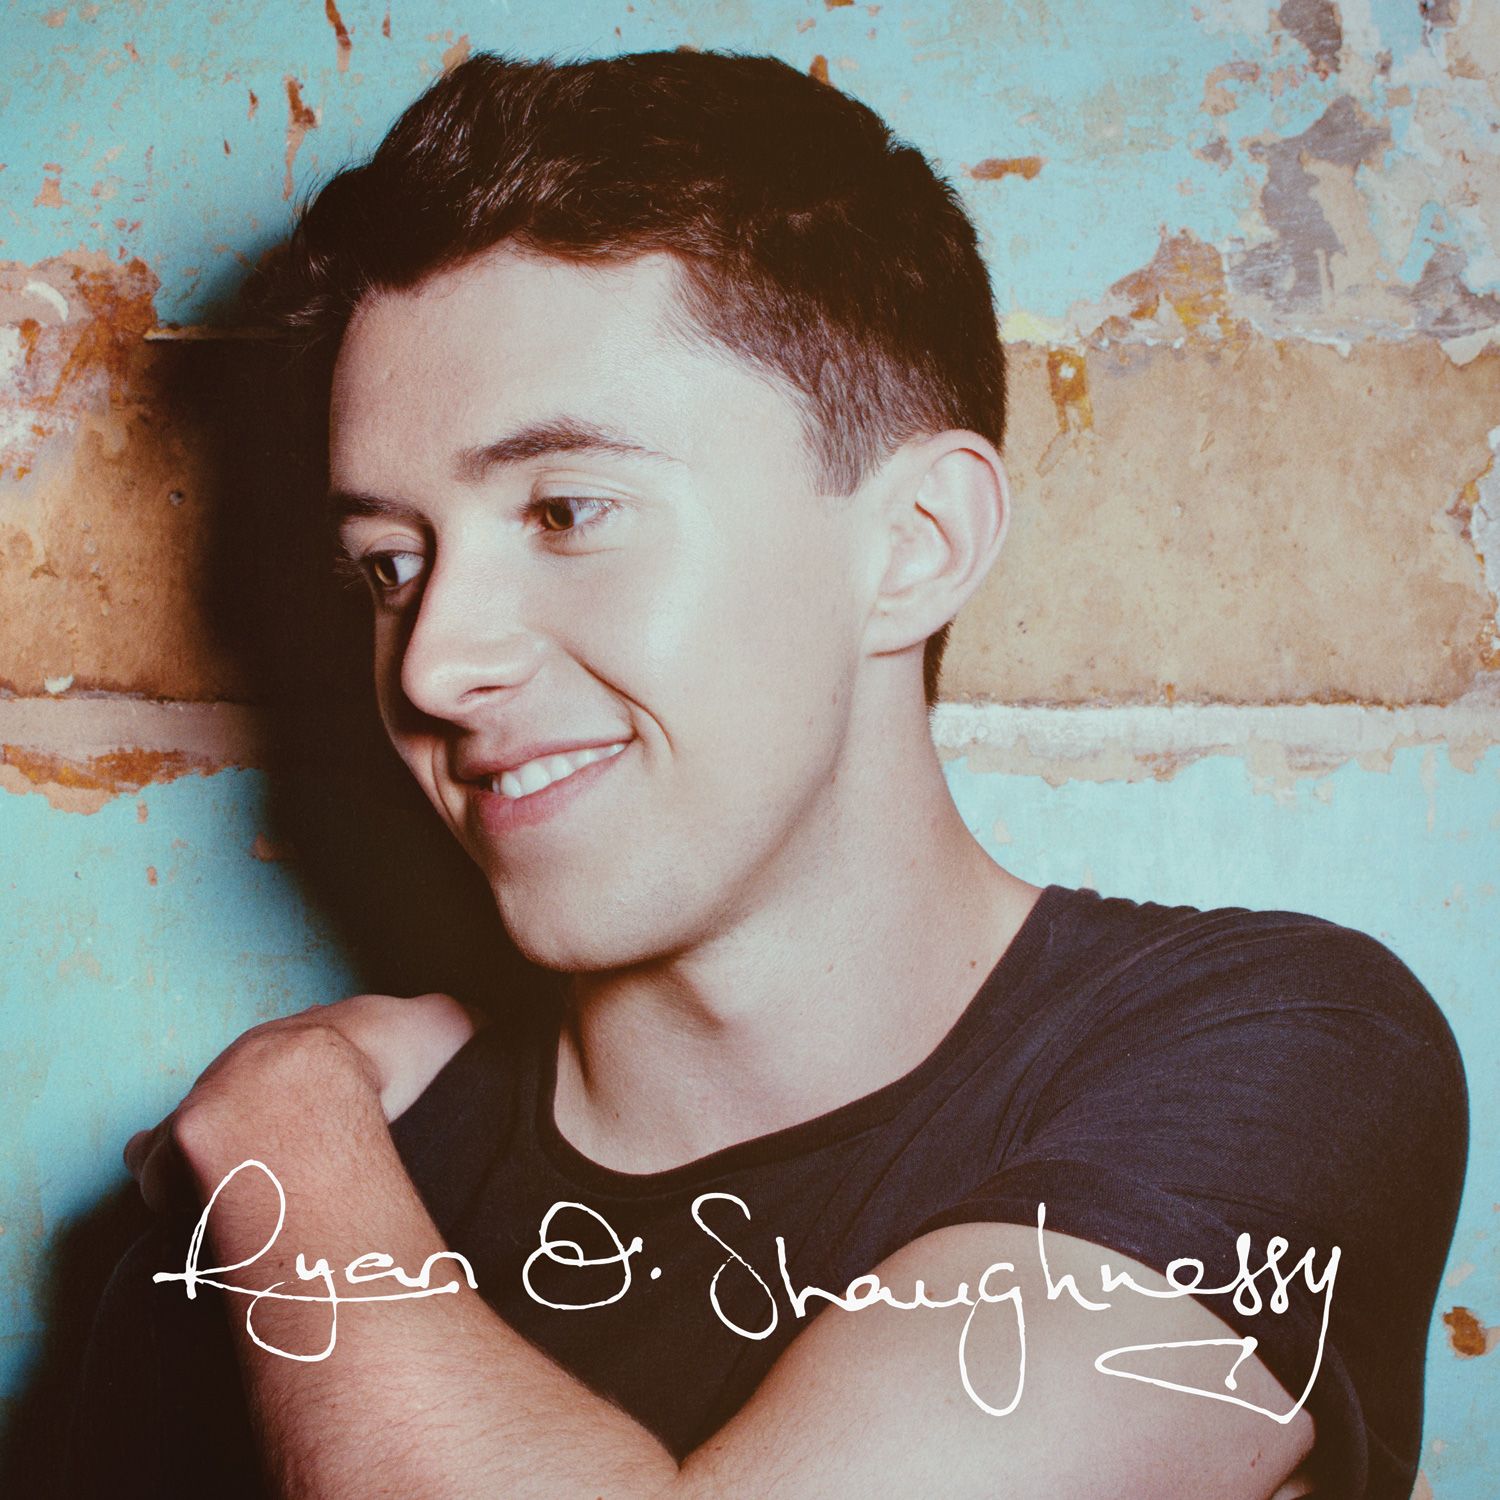 News Added Aug 09, 2012 Ryan O'Shaughnessy (born 27 September 1992) is an Irish singer-songwriter from Skerries, Dublin, known for reaching the final of the sixth series of Britain's Got Talent in May 2012, finishing in fifth place, as well as appearing on the first series of The Voice of Ireland. Submitted By Joseph Holmes […]